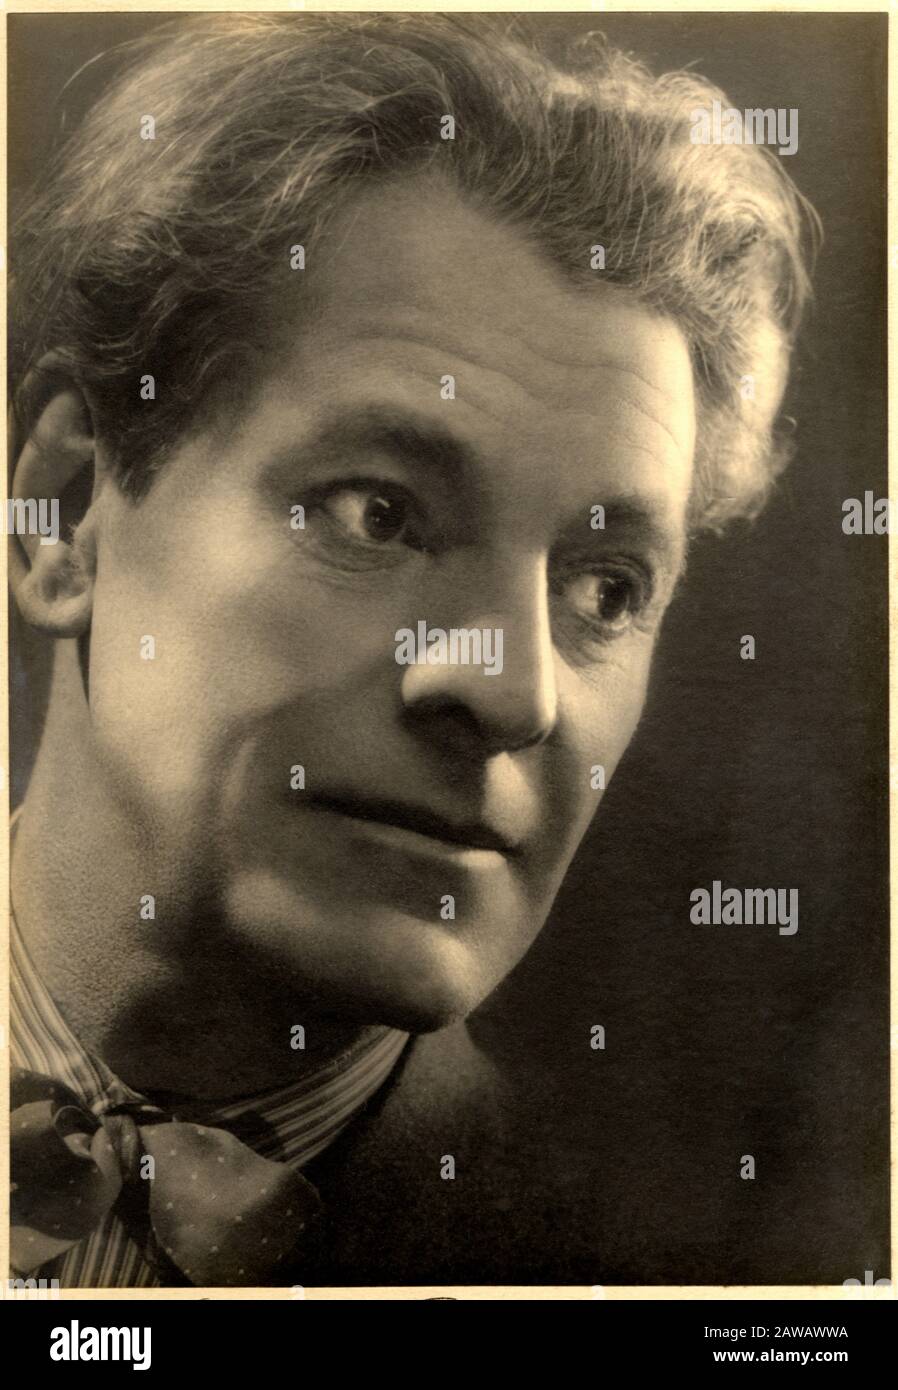 1934, TORINO , ITALY : The german-albanian theatre actor  ALEXANDER MOISSI ( Trieste 1879 - Wien 1935 ). Photo by Vicari , Torino.  Moissi died on 22 Stock Photo